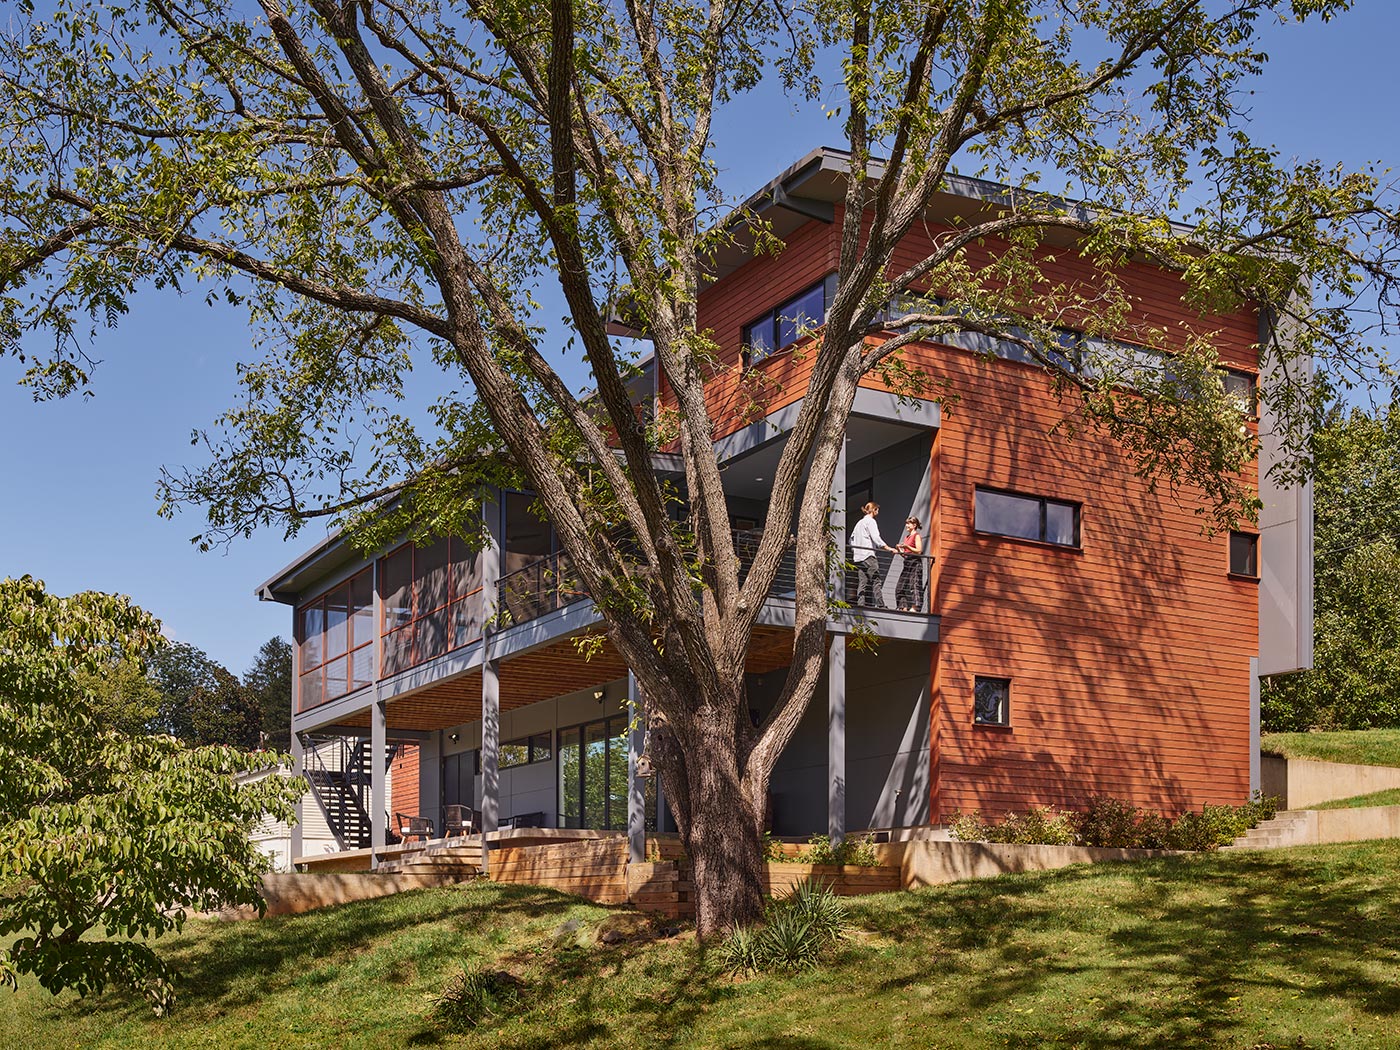 Modern House in Charlottesville with Orange Wood Siding, Screen Porch at Second Floor, Deep Overhangs and Painted Steel Metal Stair Designed by Charlottesville, Virginia Green Architect HEDS and Chris Hays.